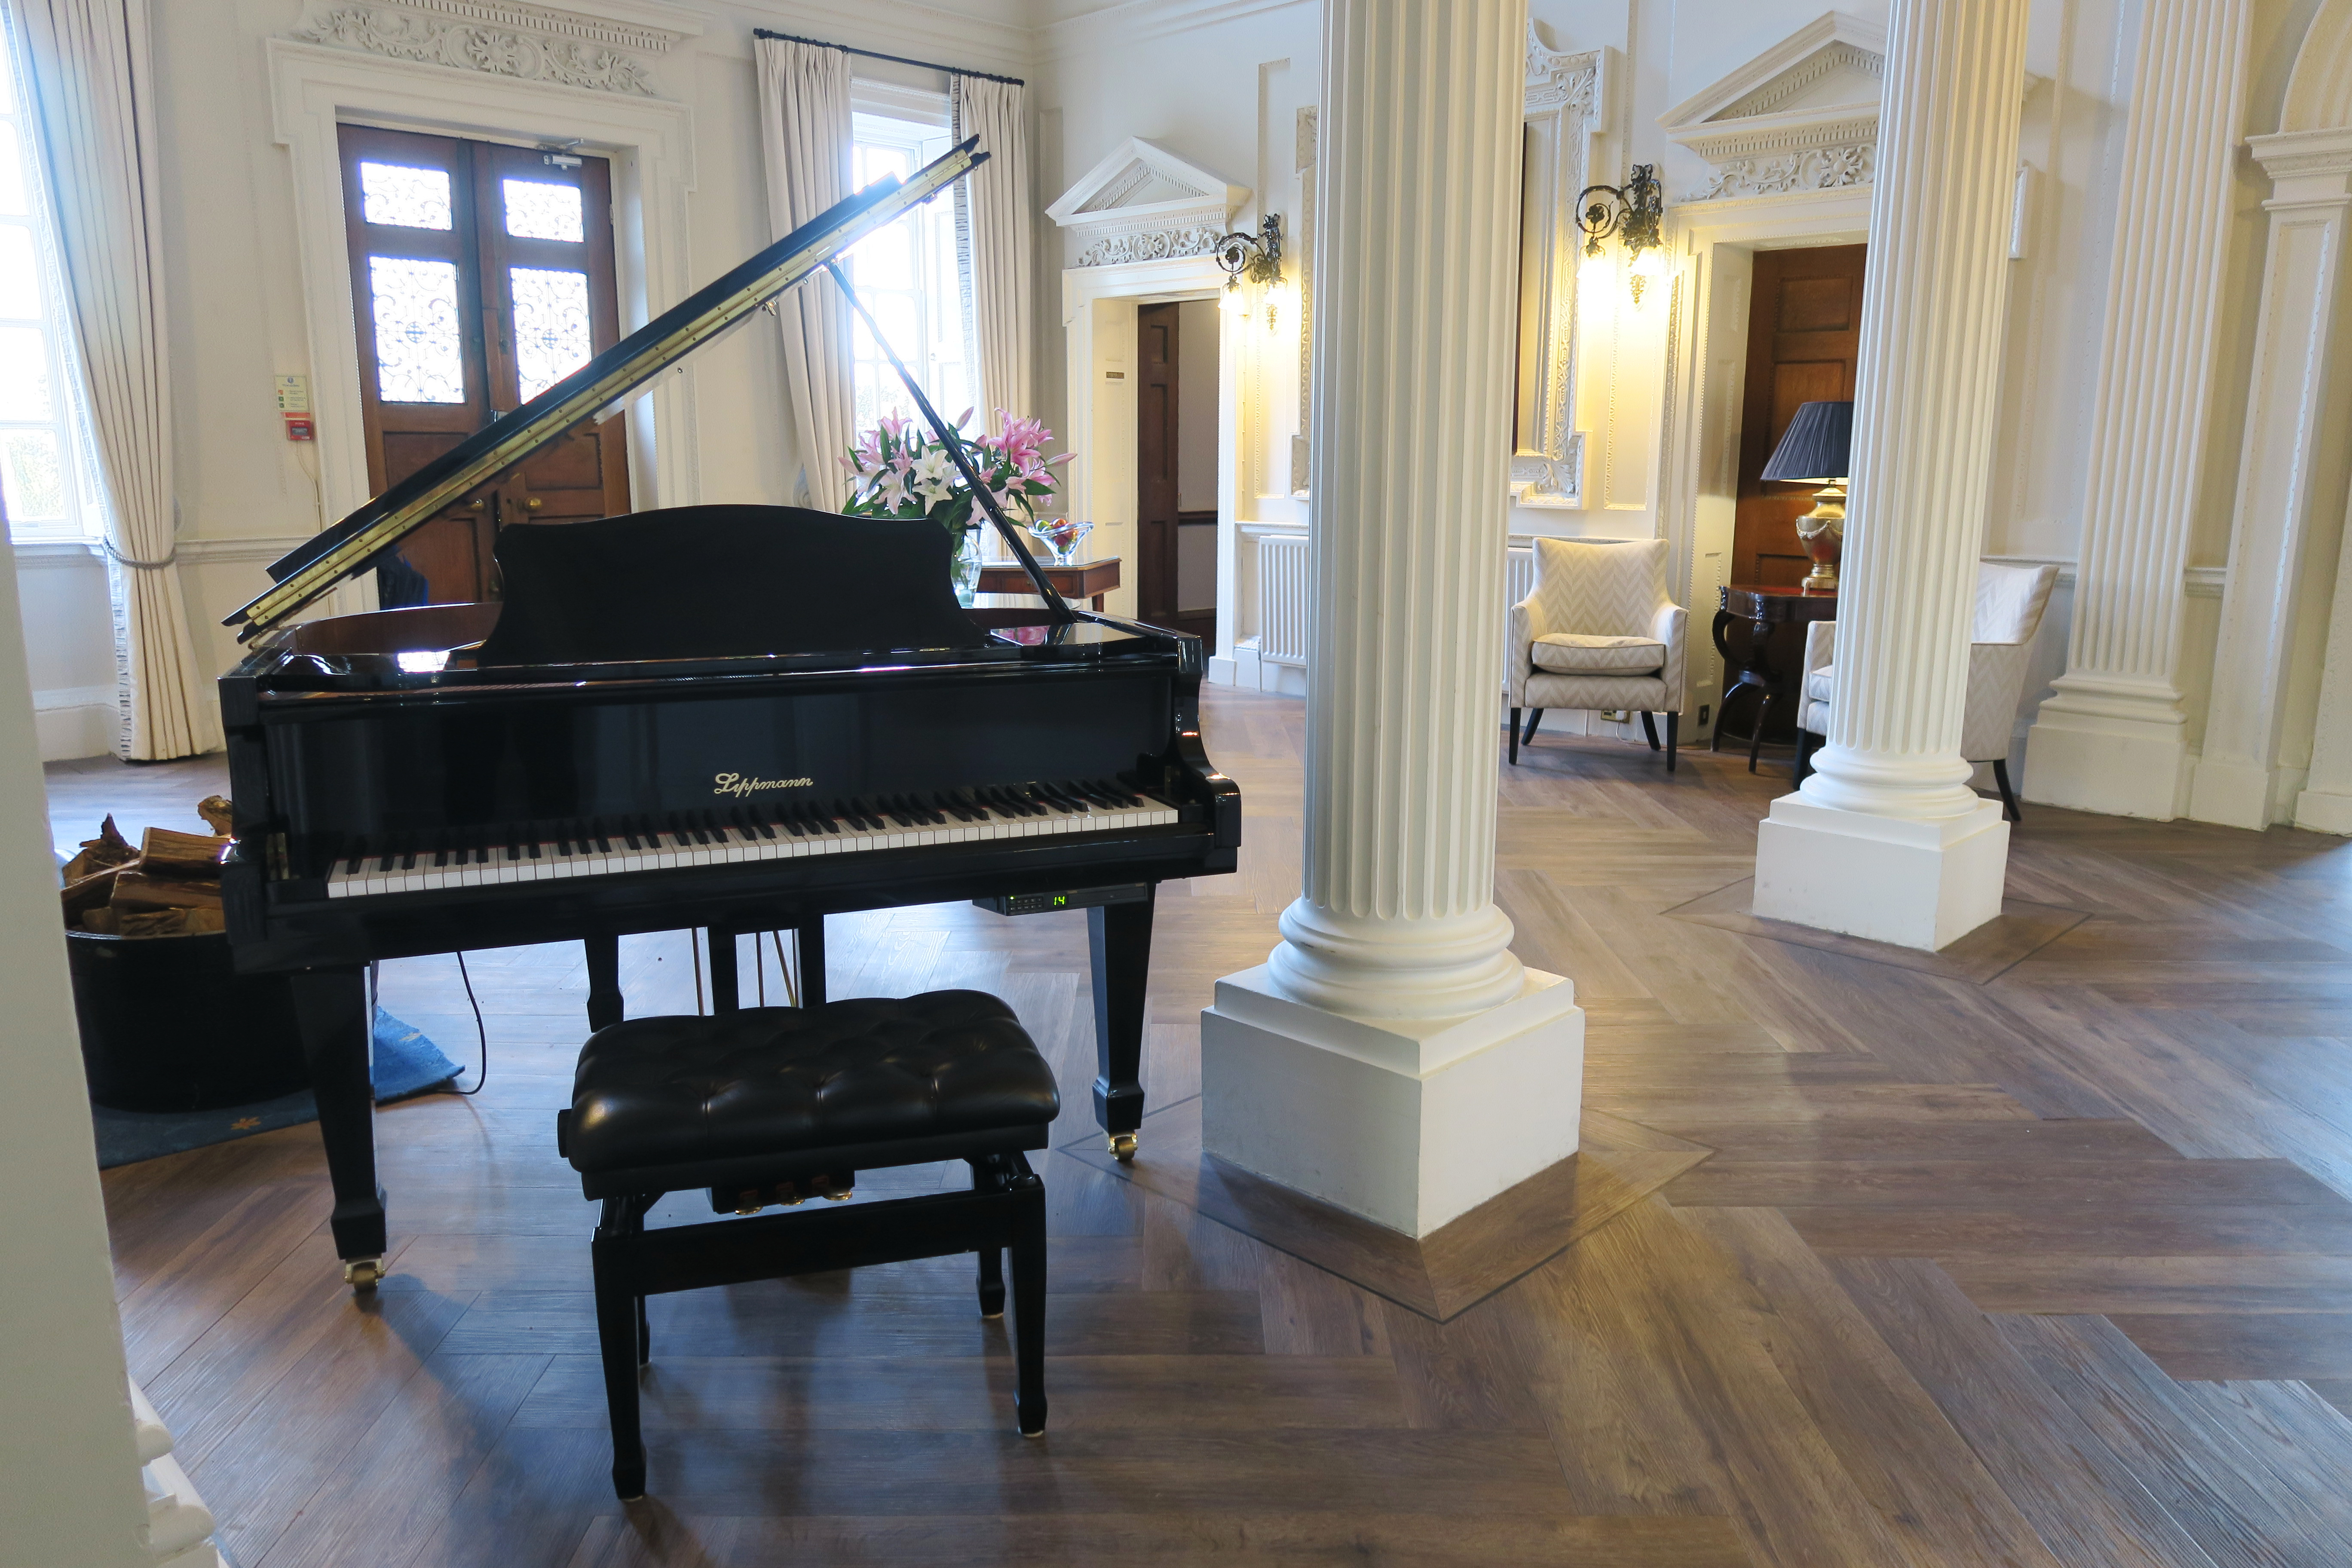 the reception area at Swinfen Hall hotel. In the foreground a large black grand piano can be seen.